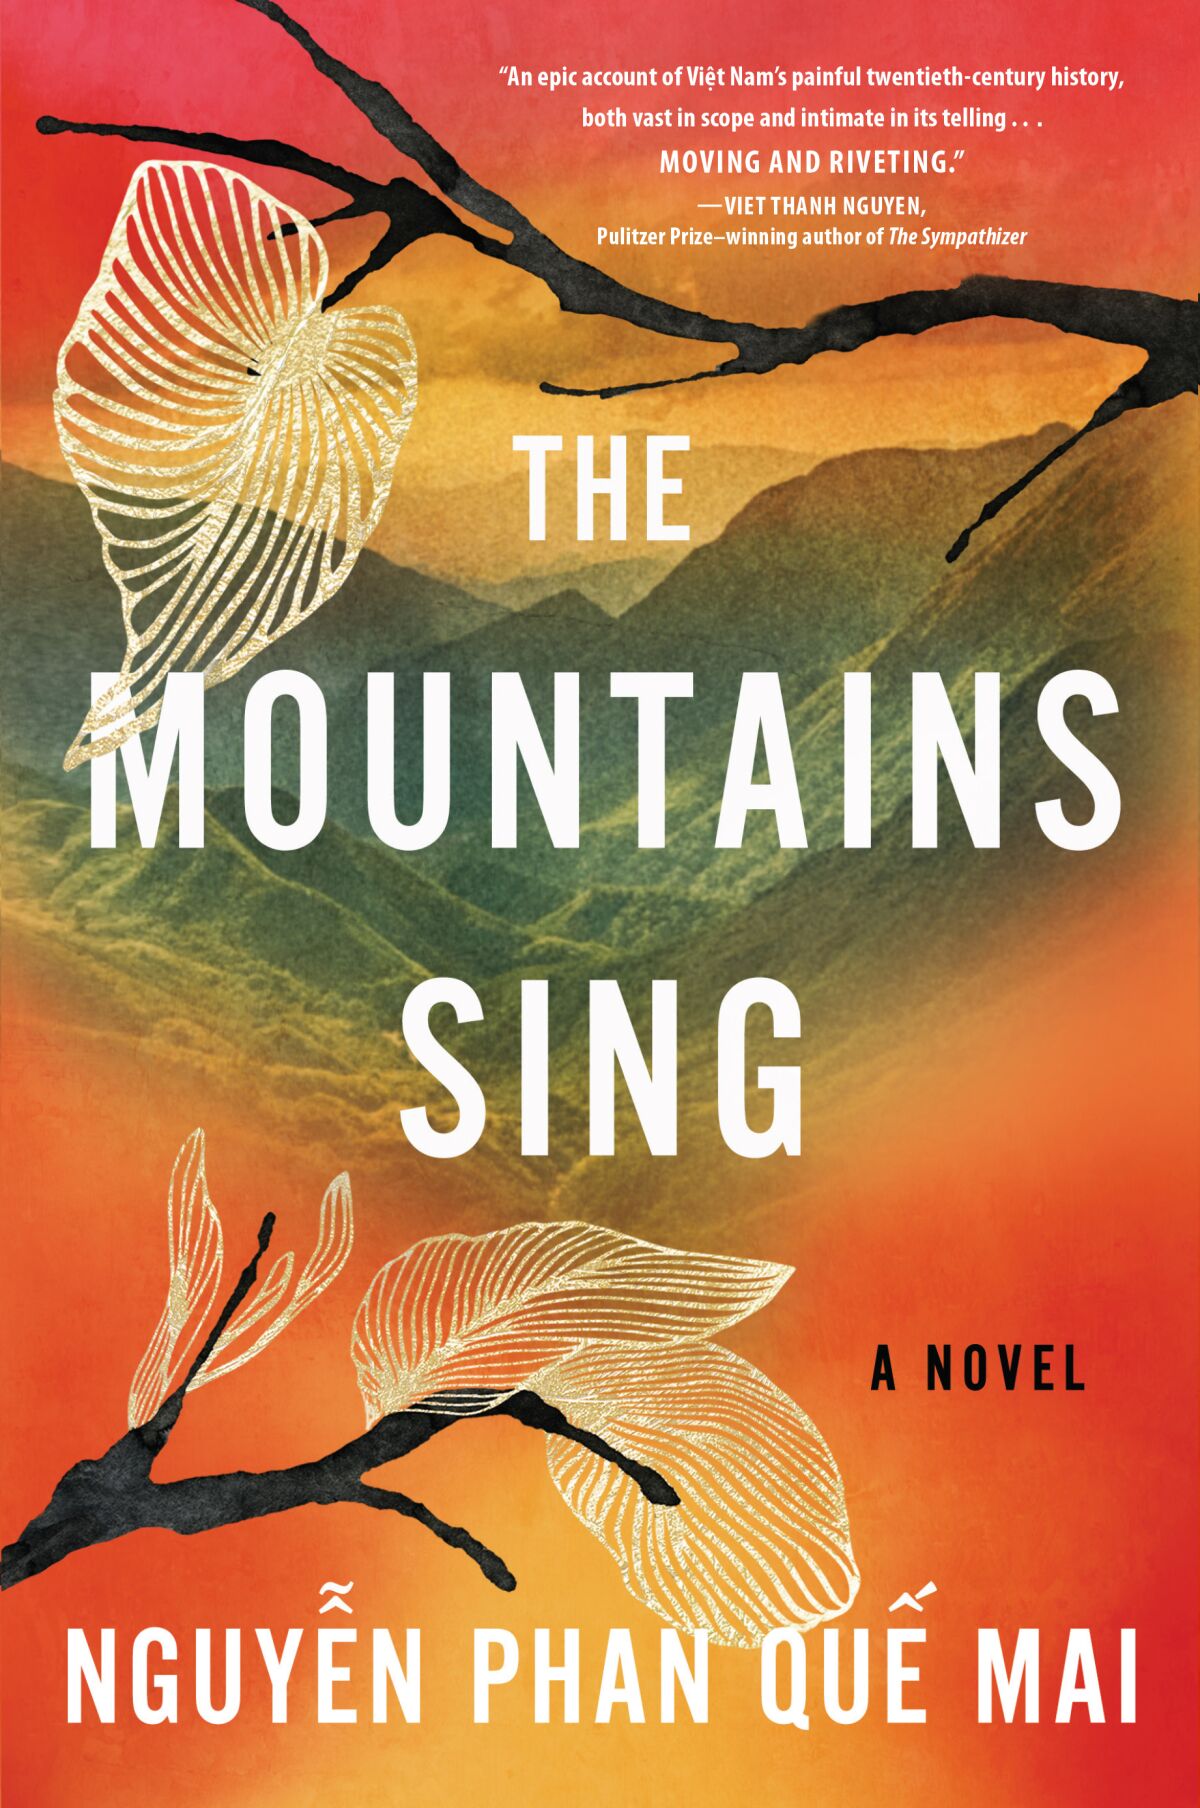 "The Mountains Sing" by Que Phan Nguyen, one of eight books for your virtual Memorial Day travel.